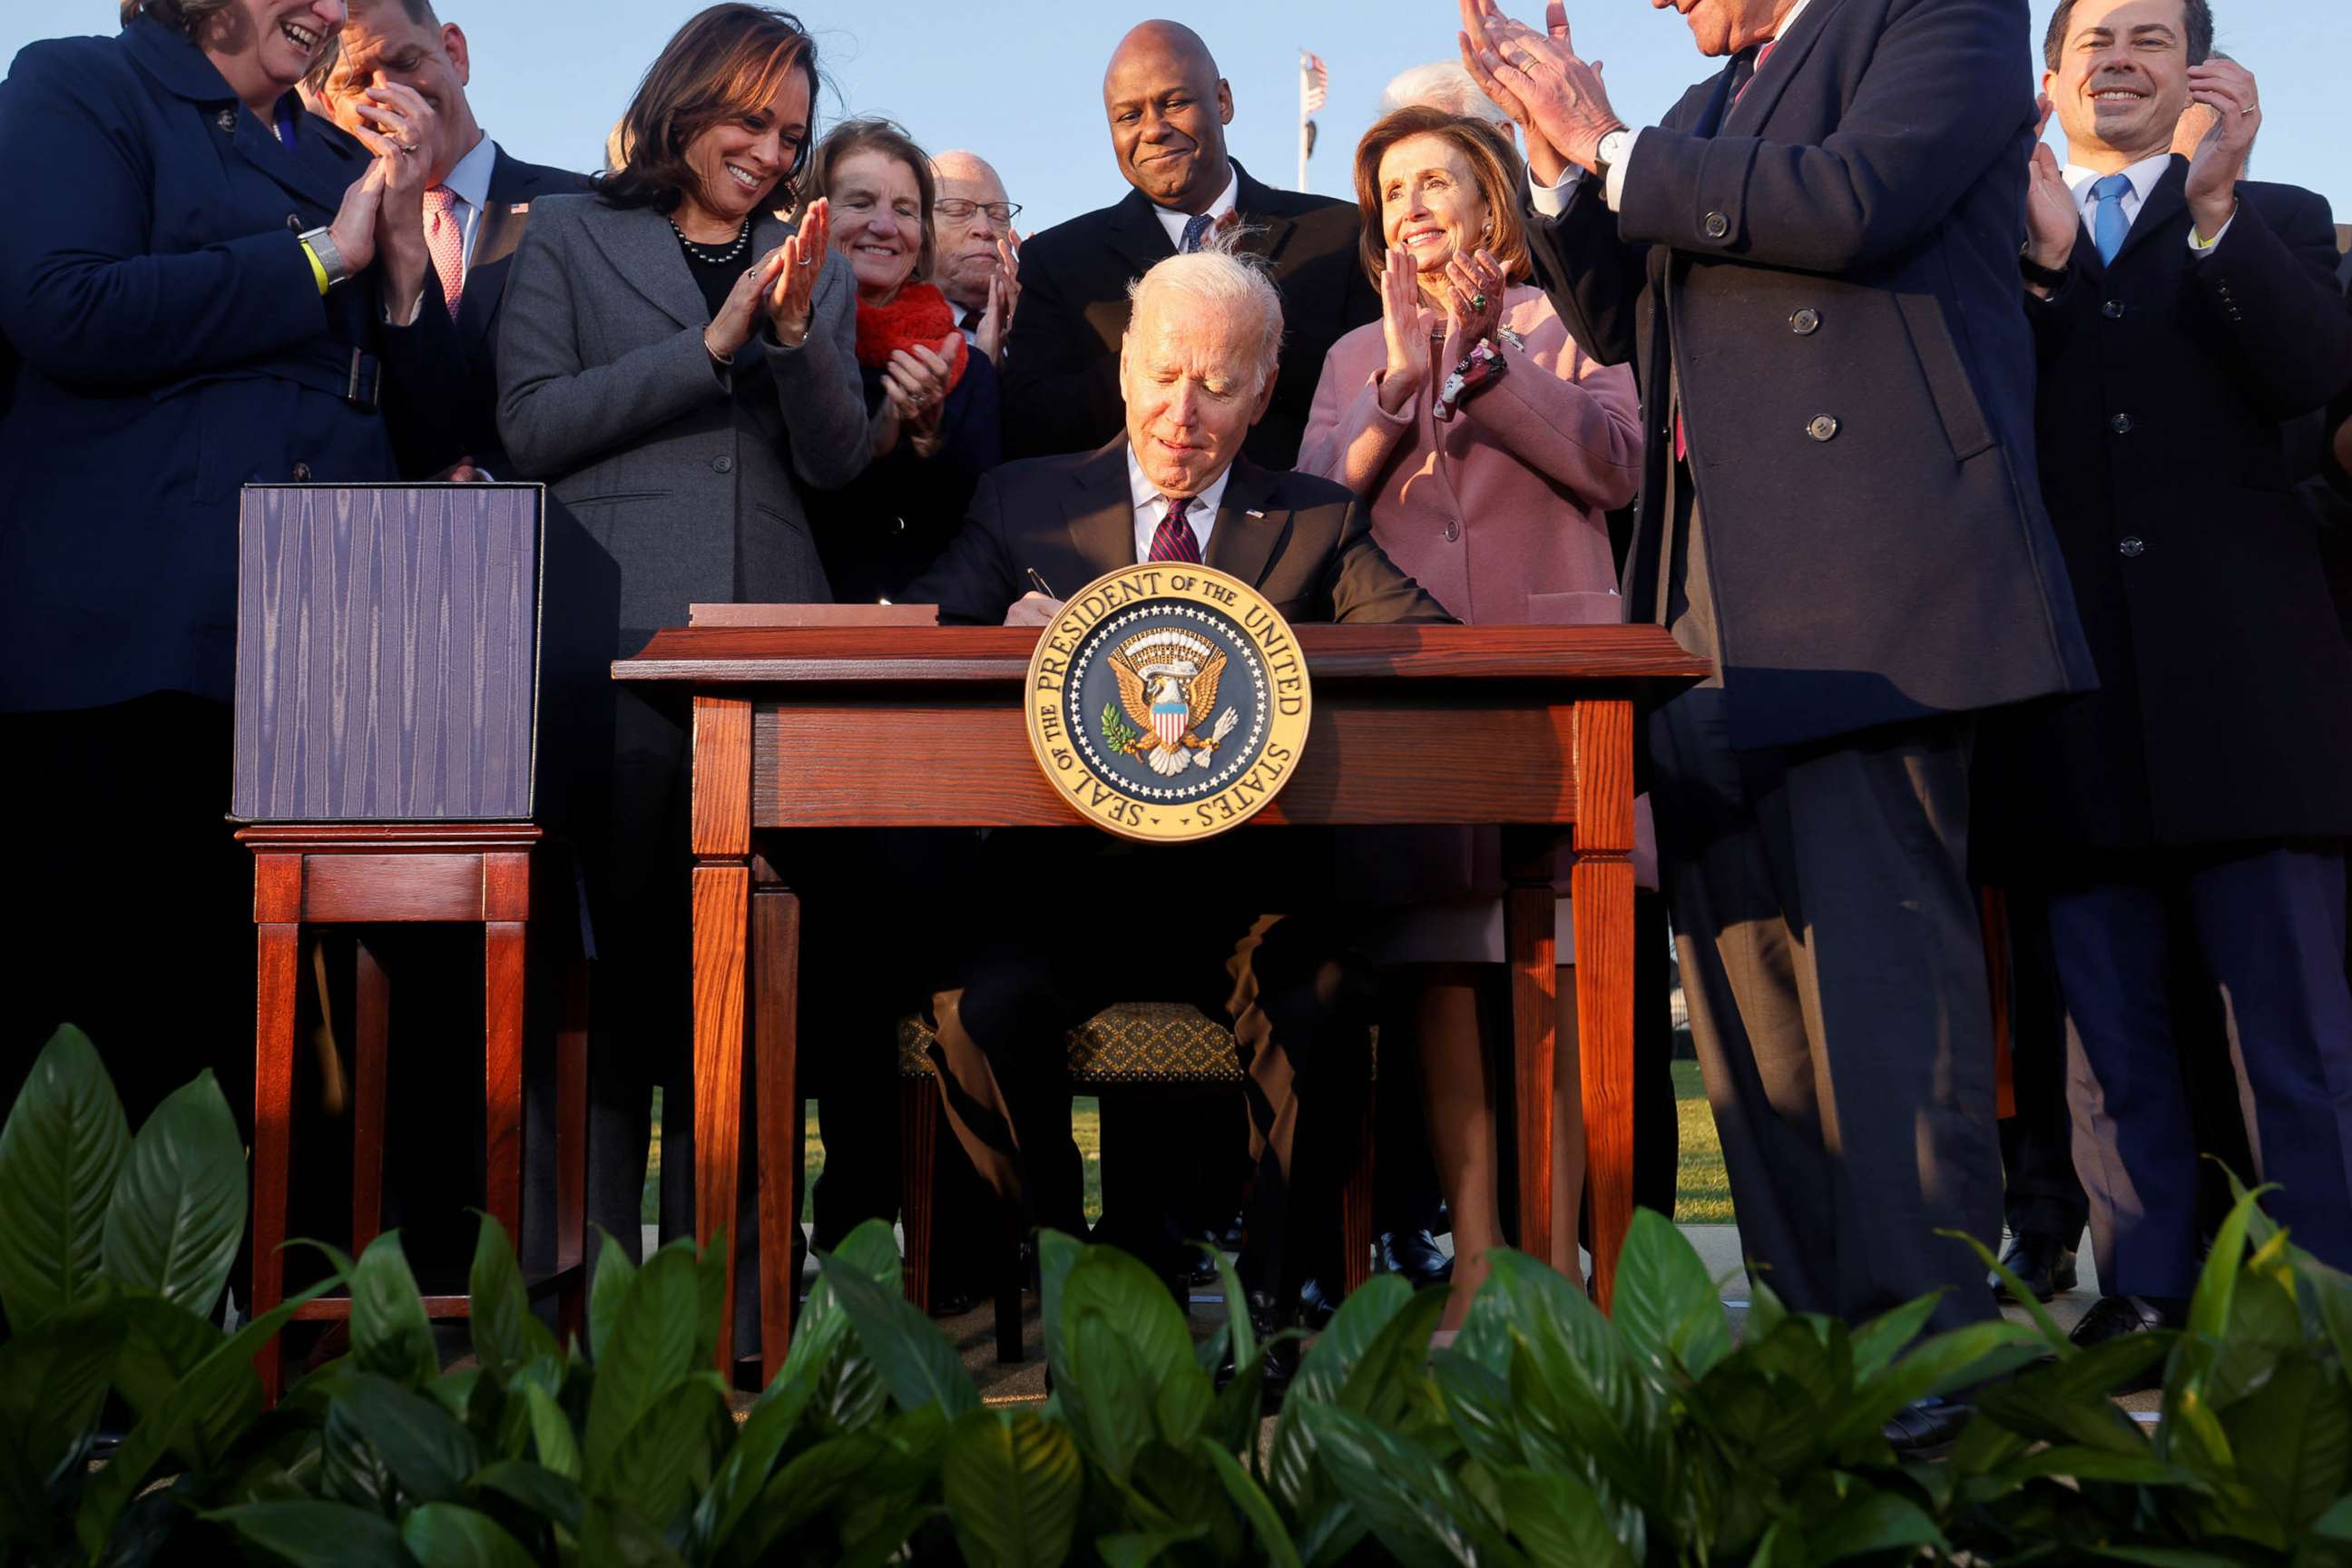 PHOTO: President Joe Biden signs the "Infrastructure Investment and Jobs Act" during an event on the South Lawn of the White House,Nov. 15, 2021.